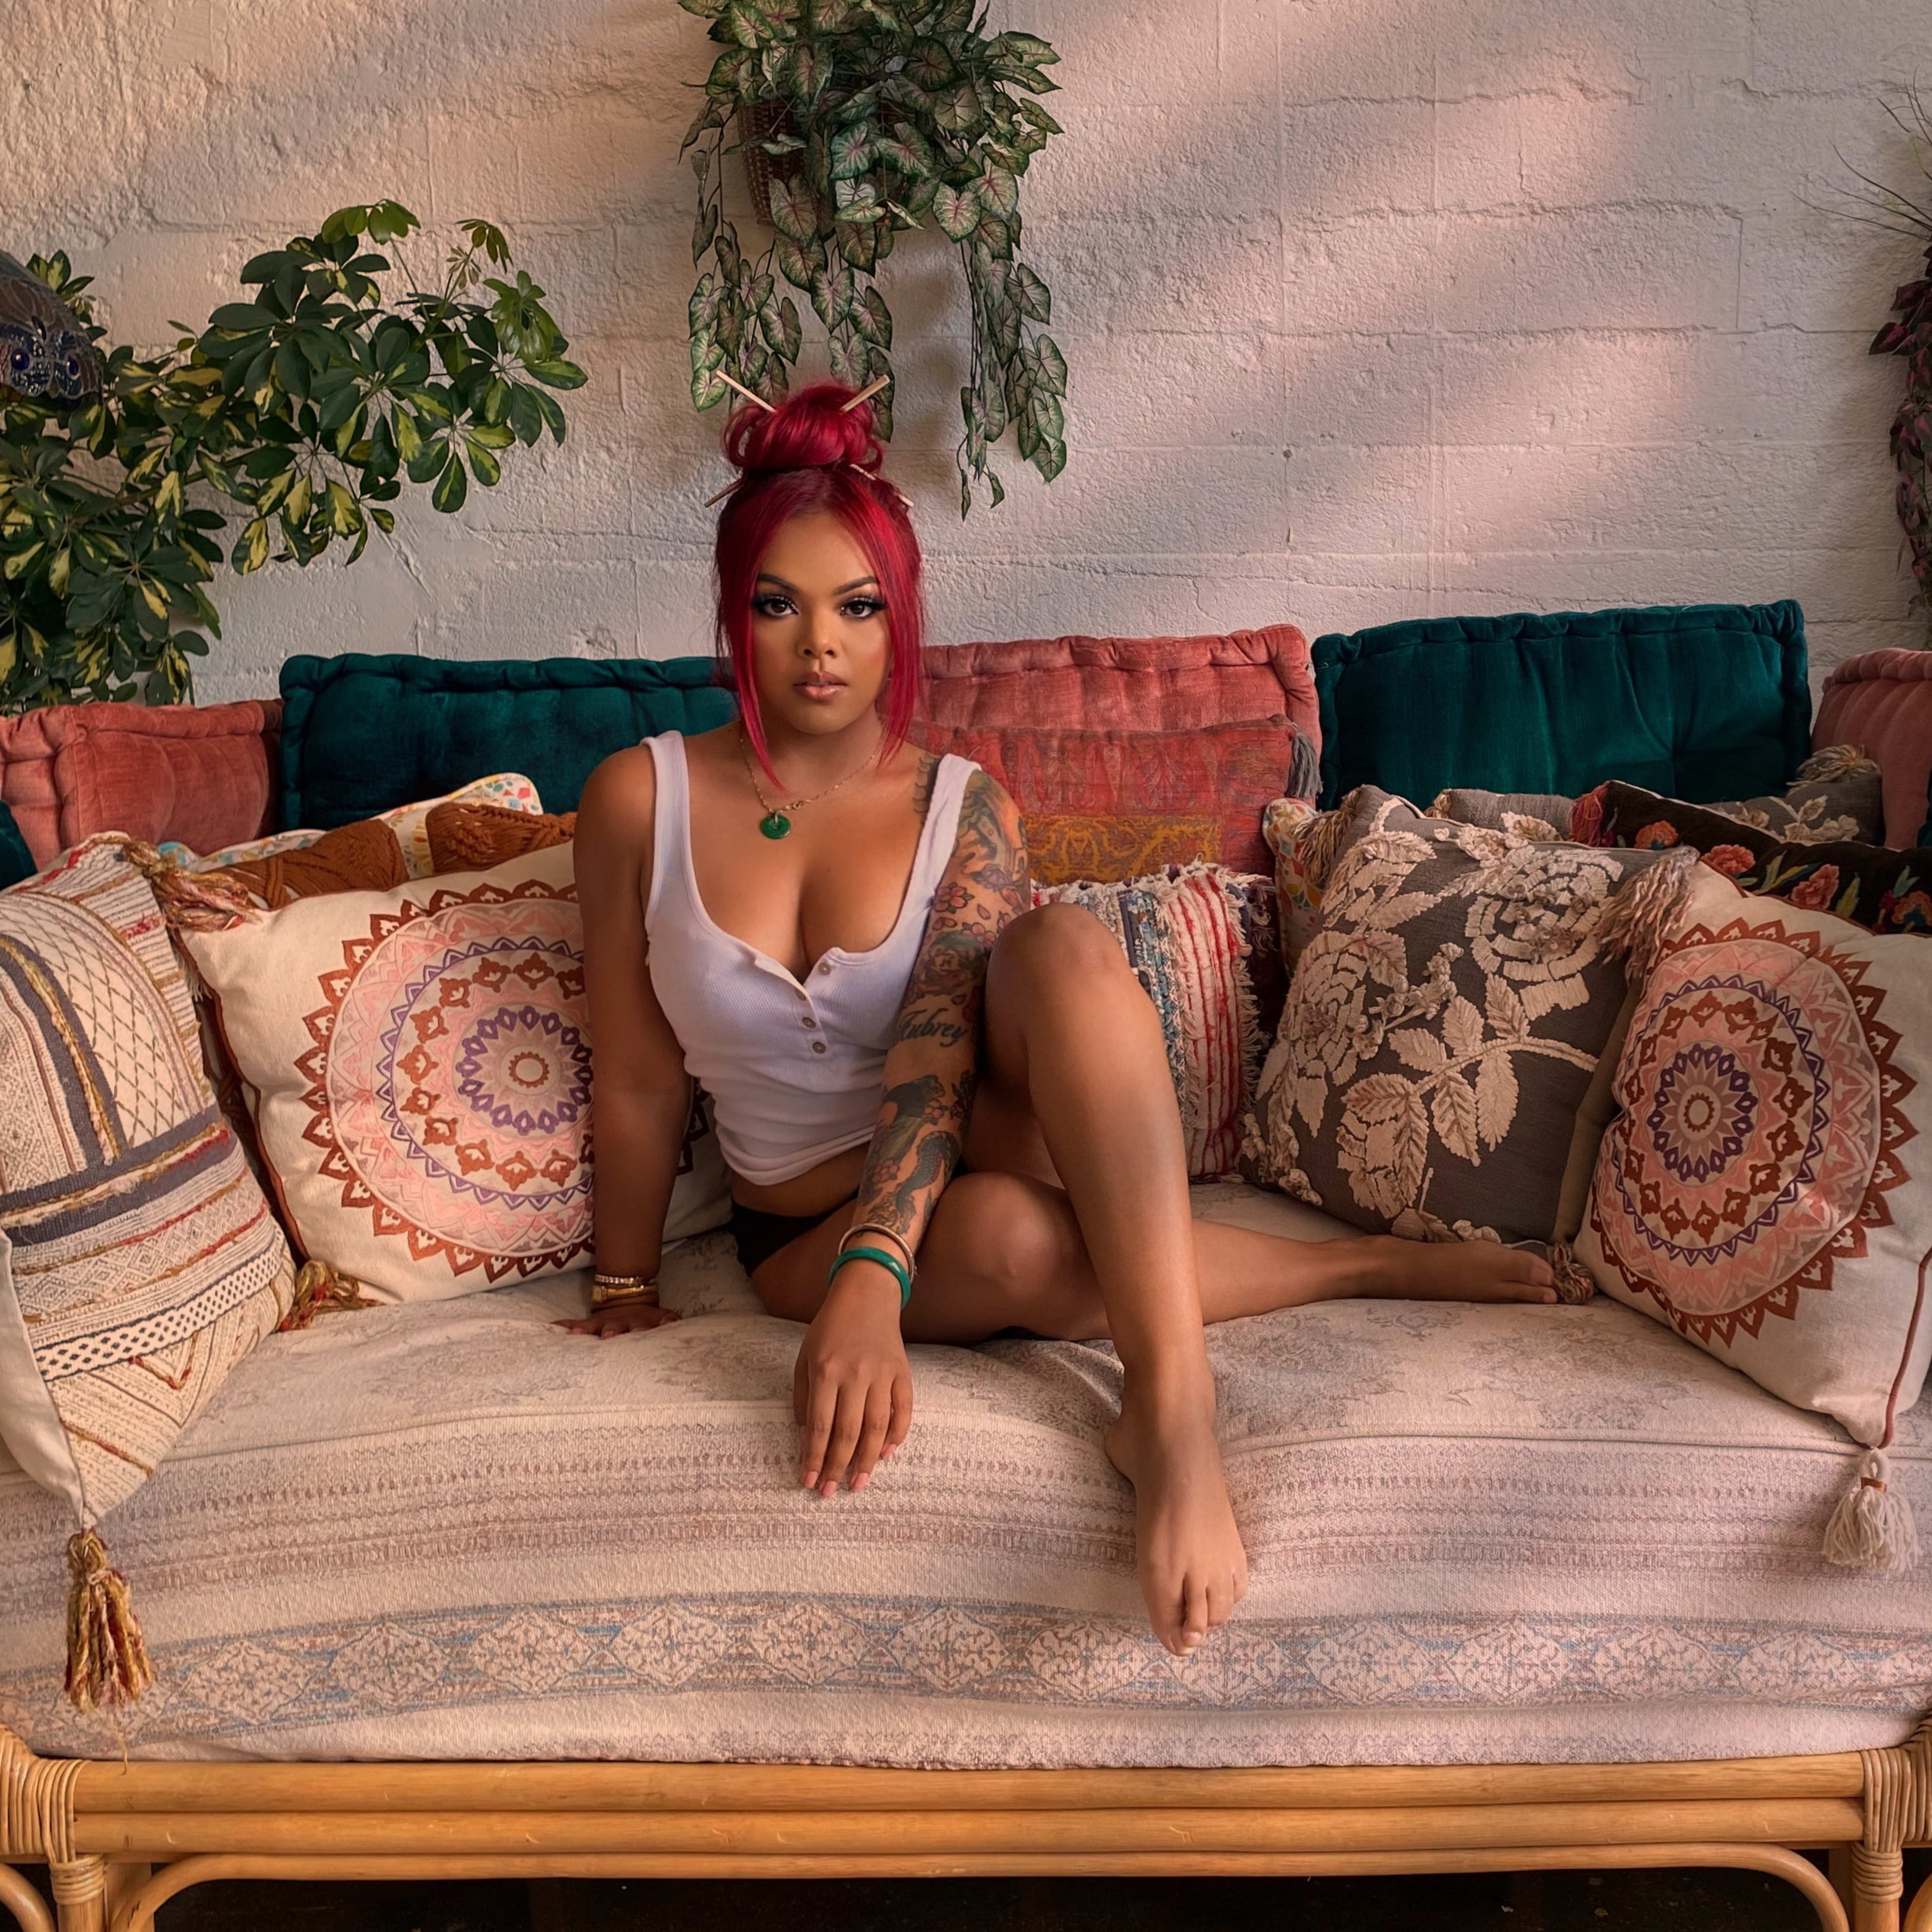 A woman with red hair lounging on a boho couch surrounded by plants during a photoshoot.